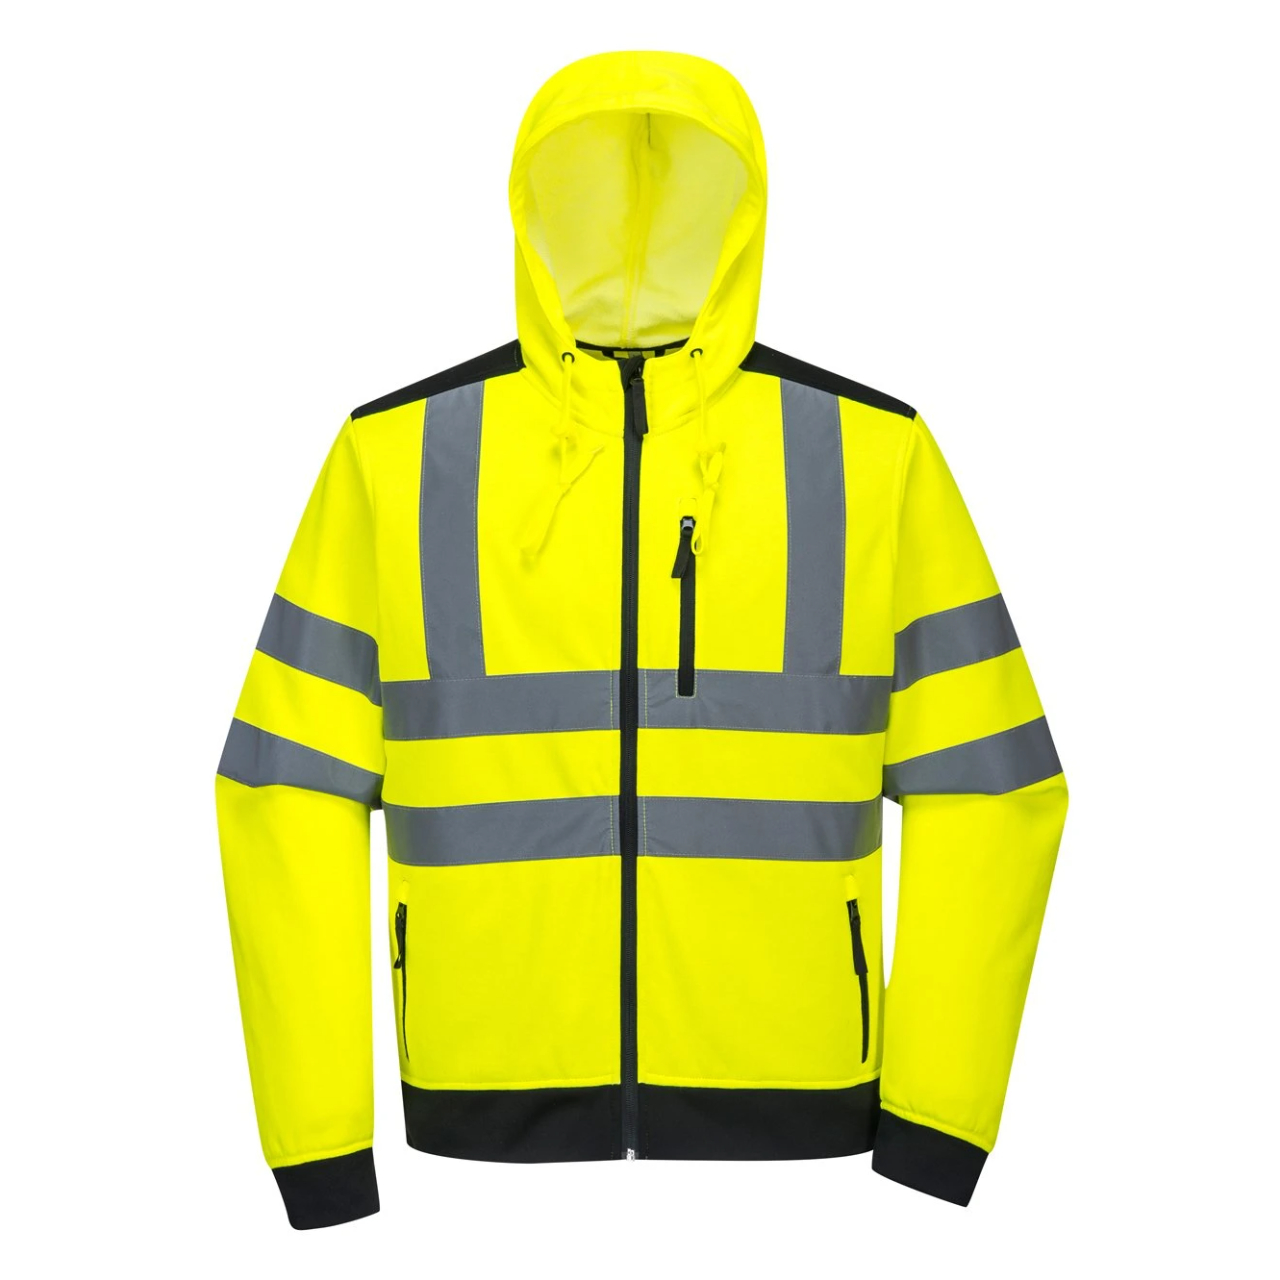 Winter Hi-Vis Safety Jacket with Reflective Tape